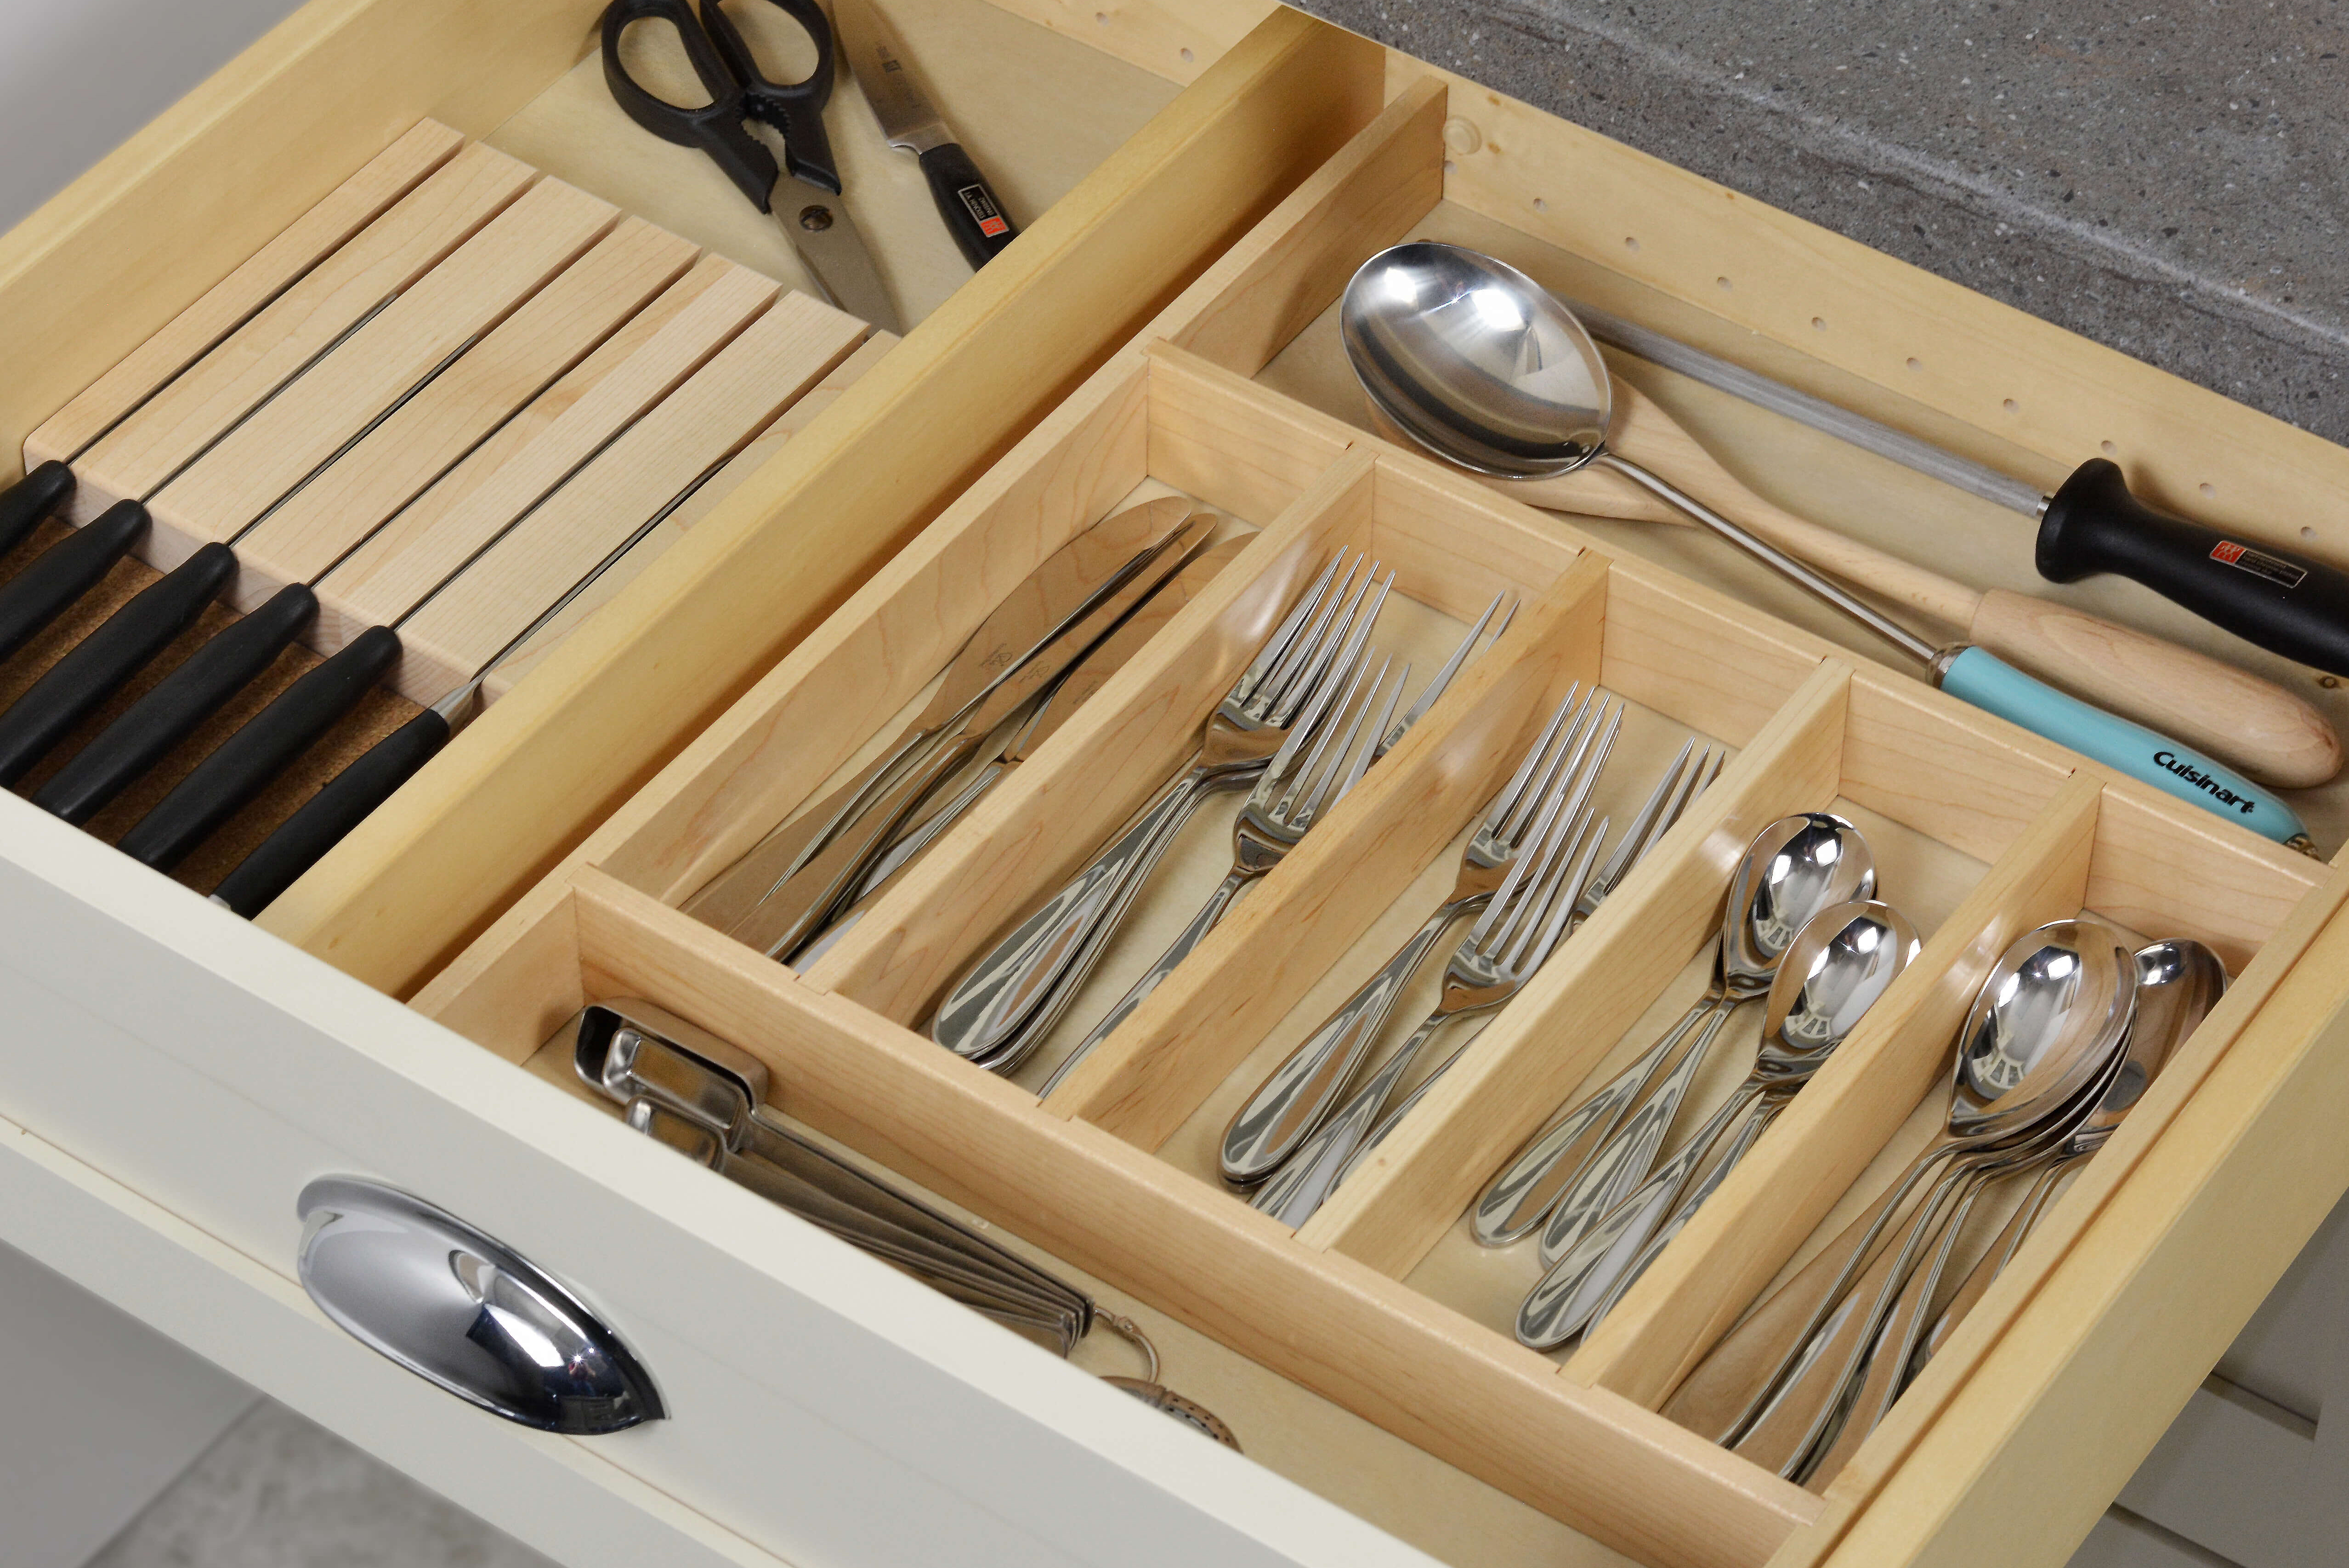 Cutlery Divider Tray and Knife Holder Combo